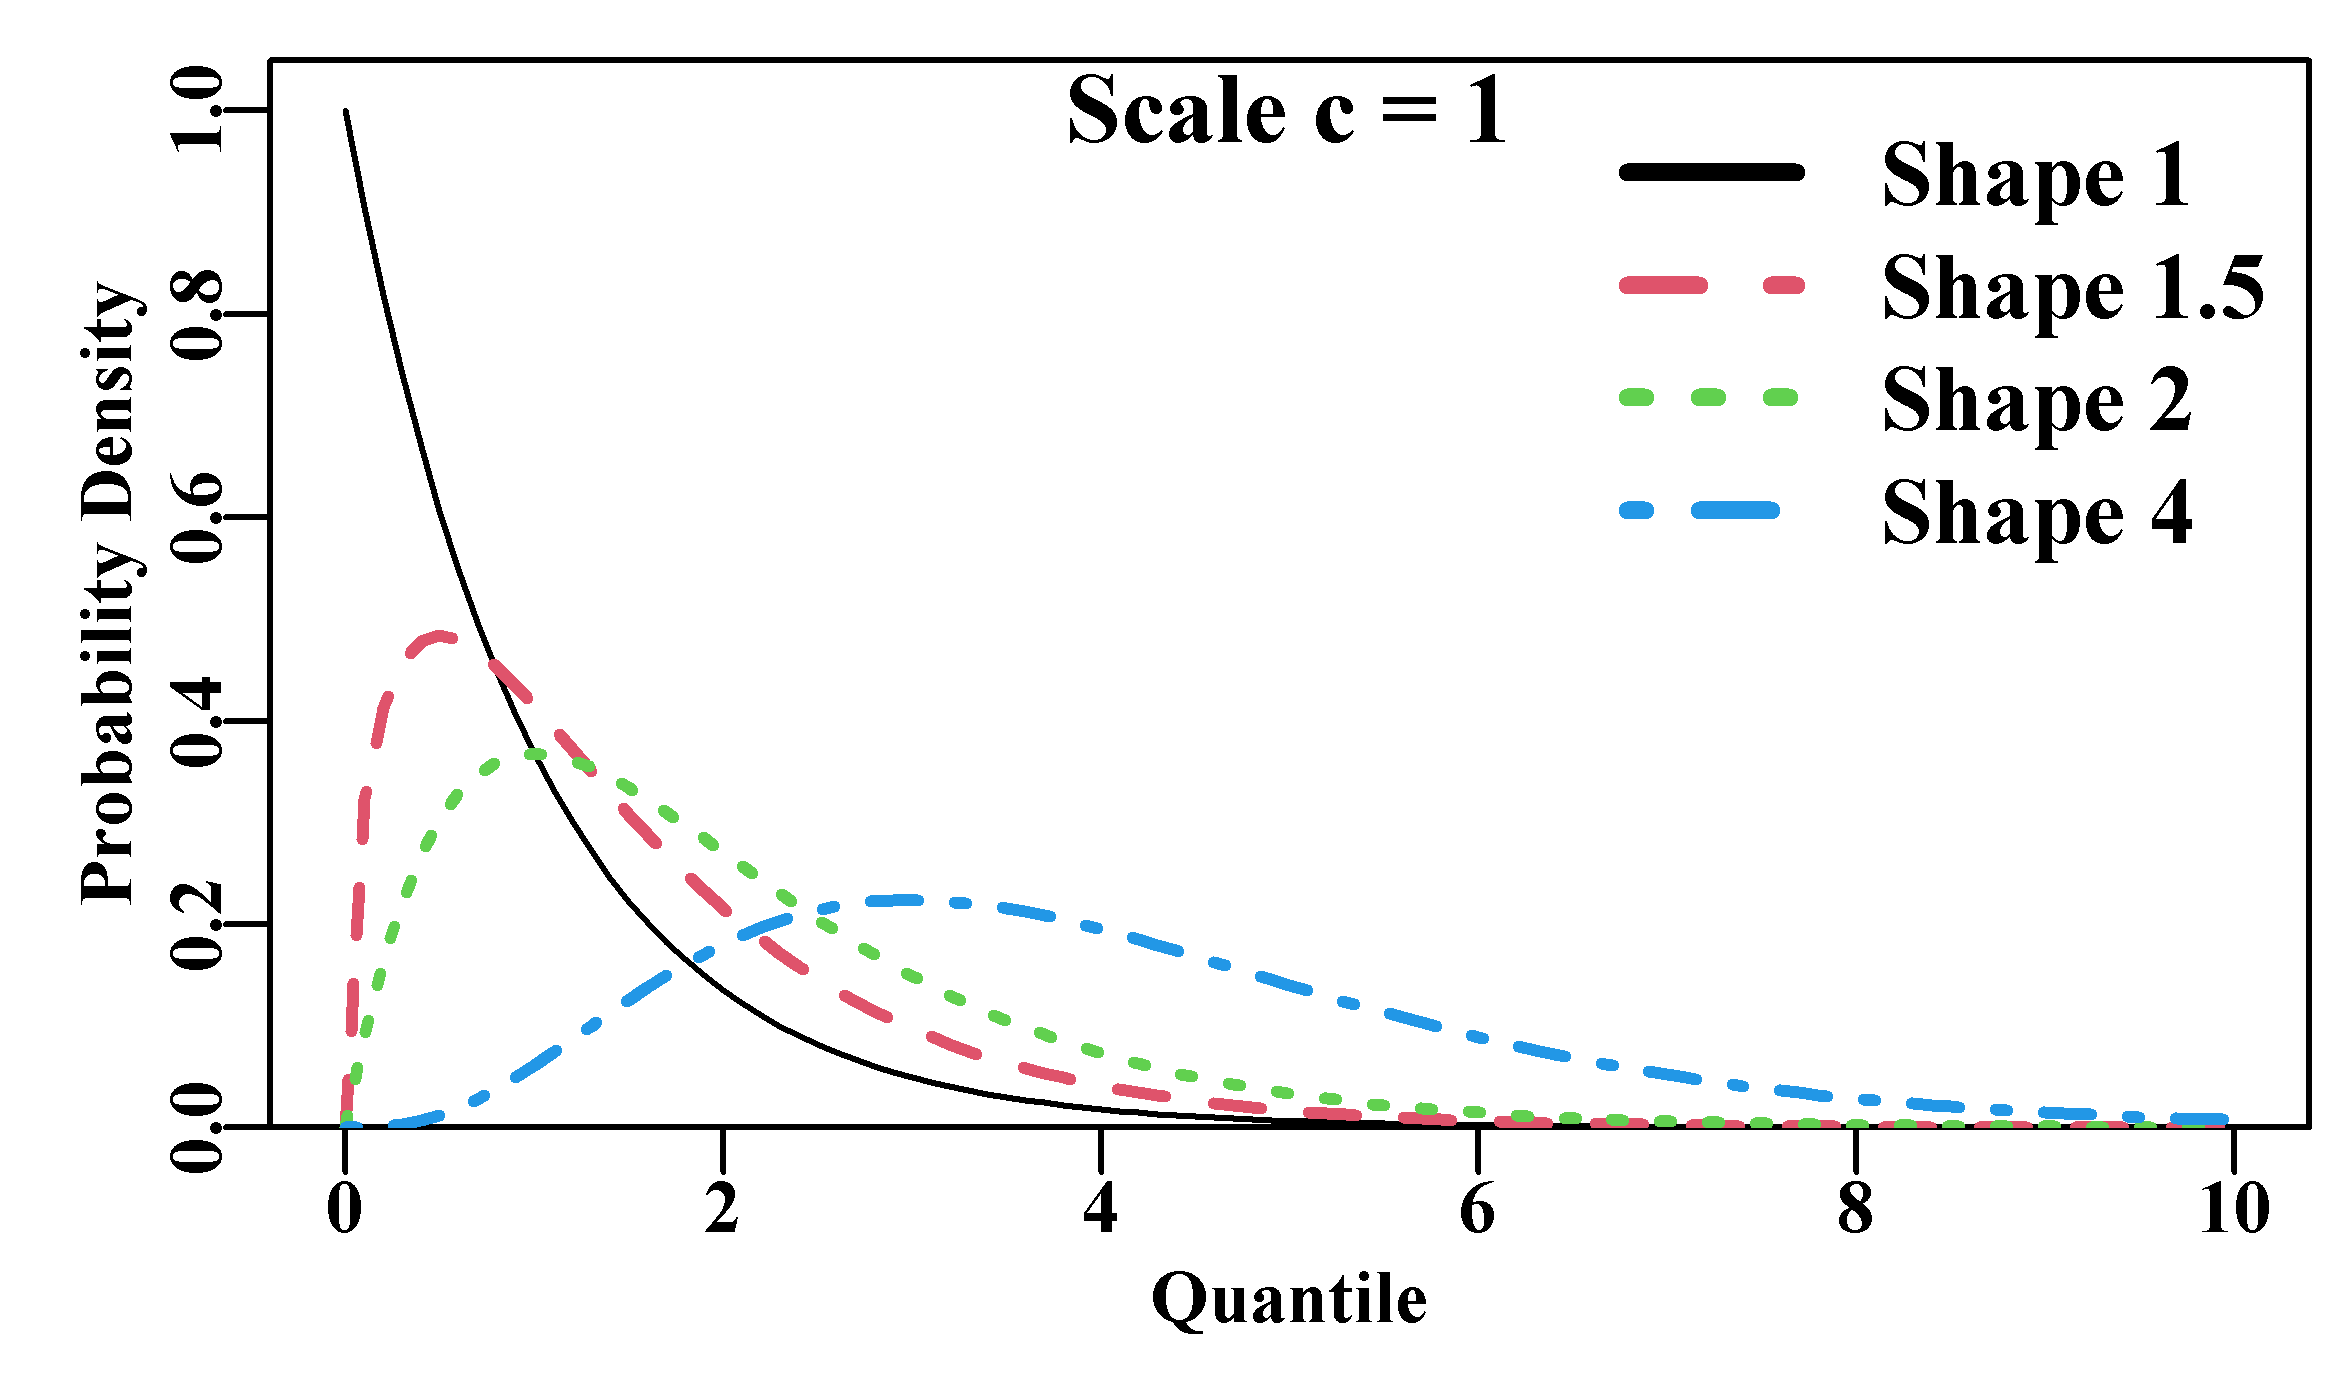 Different Gamma distributions all with a scale c = 1.0.